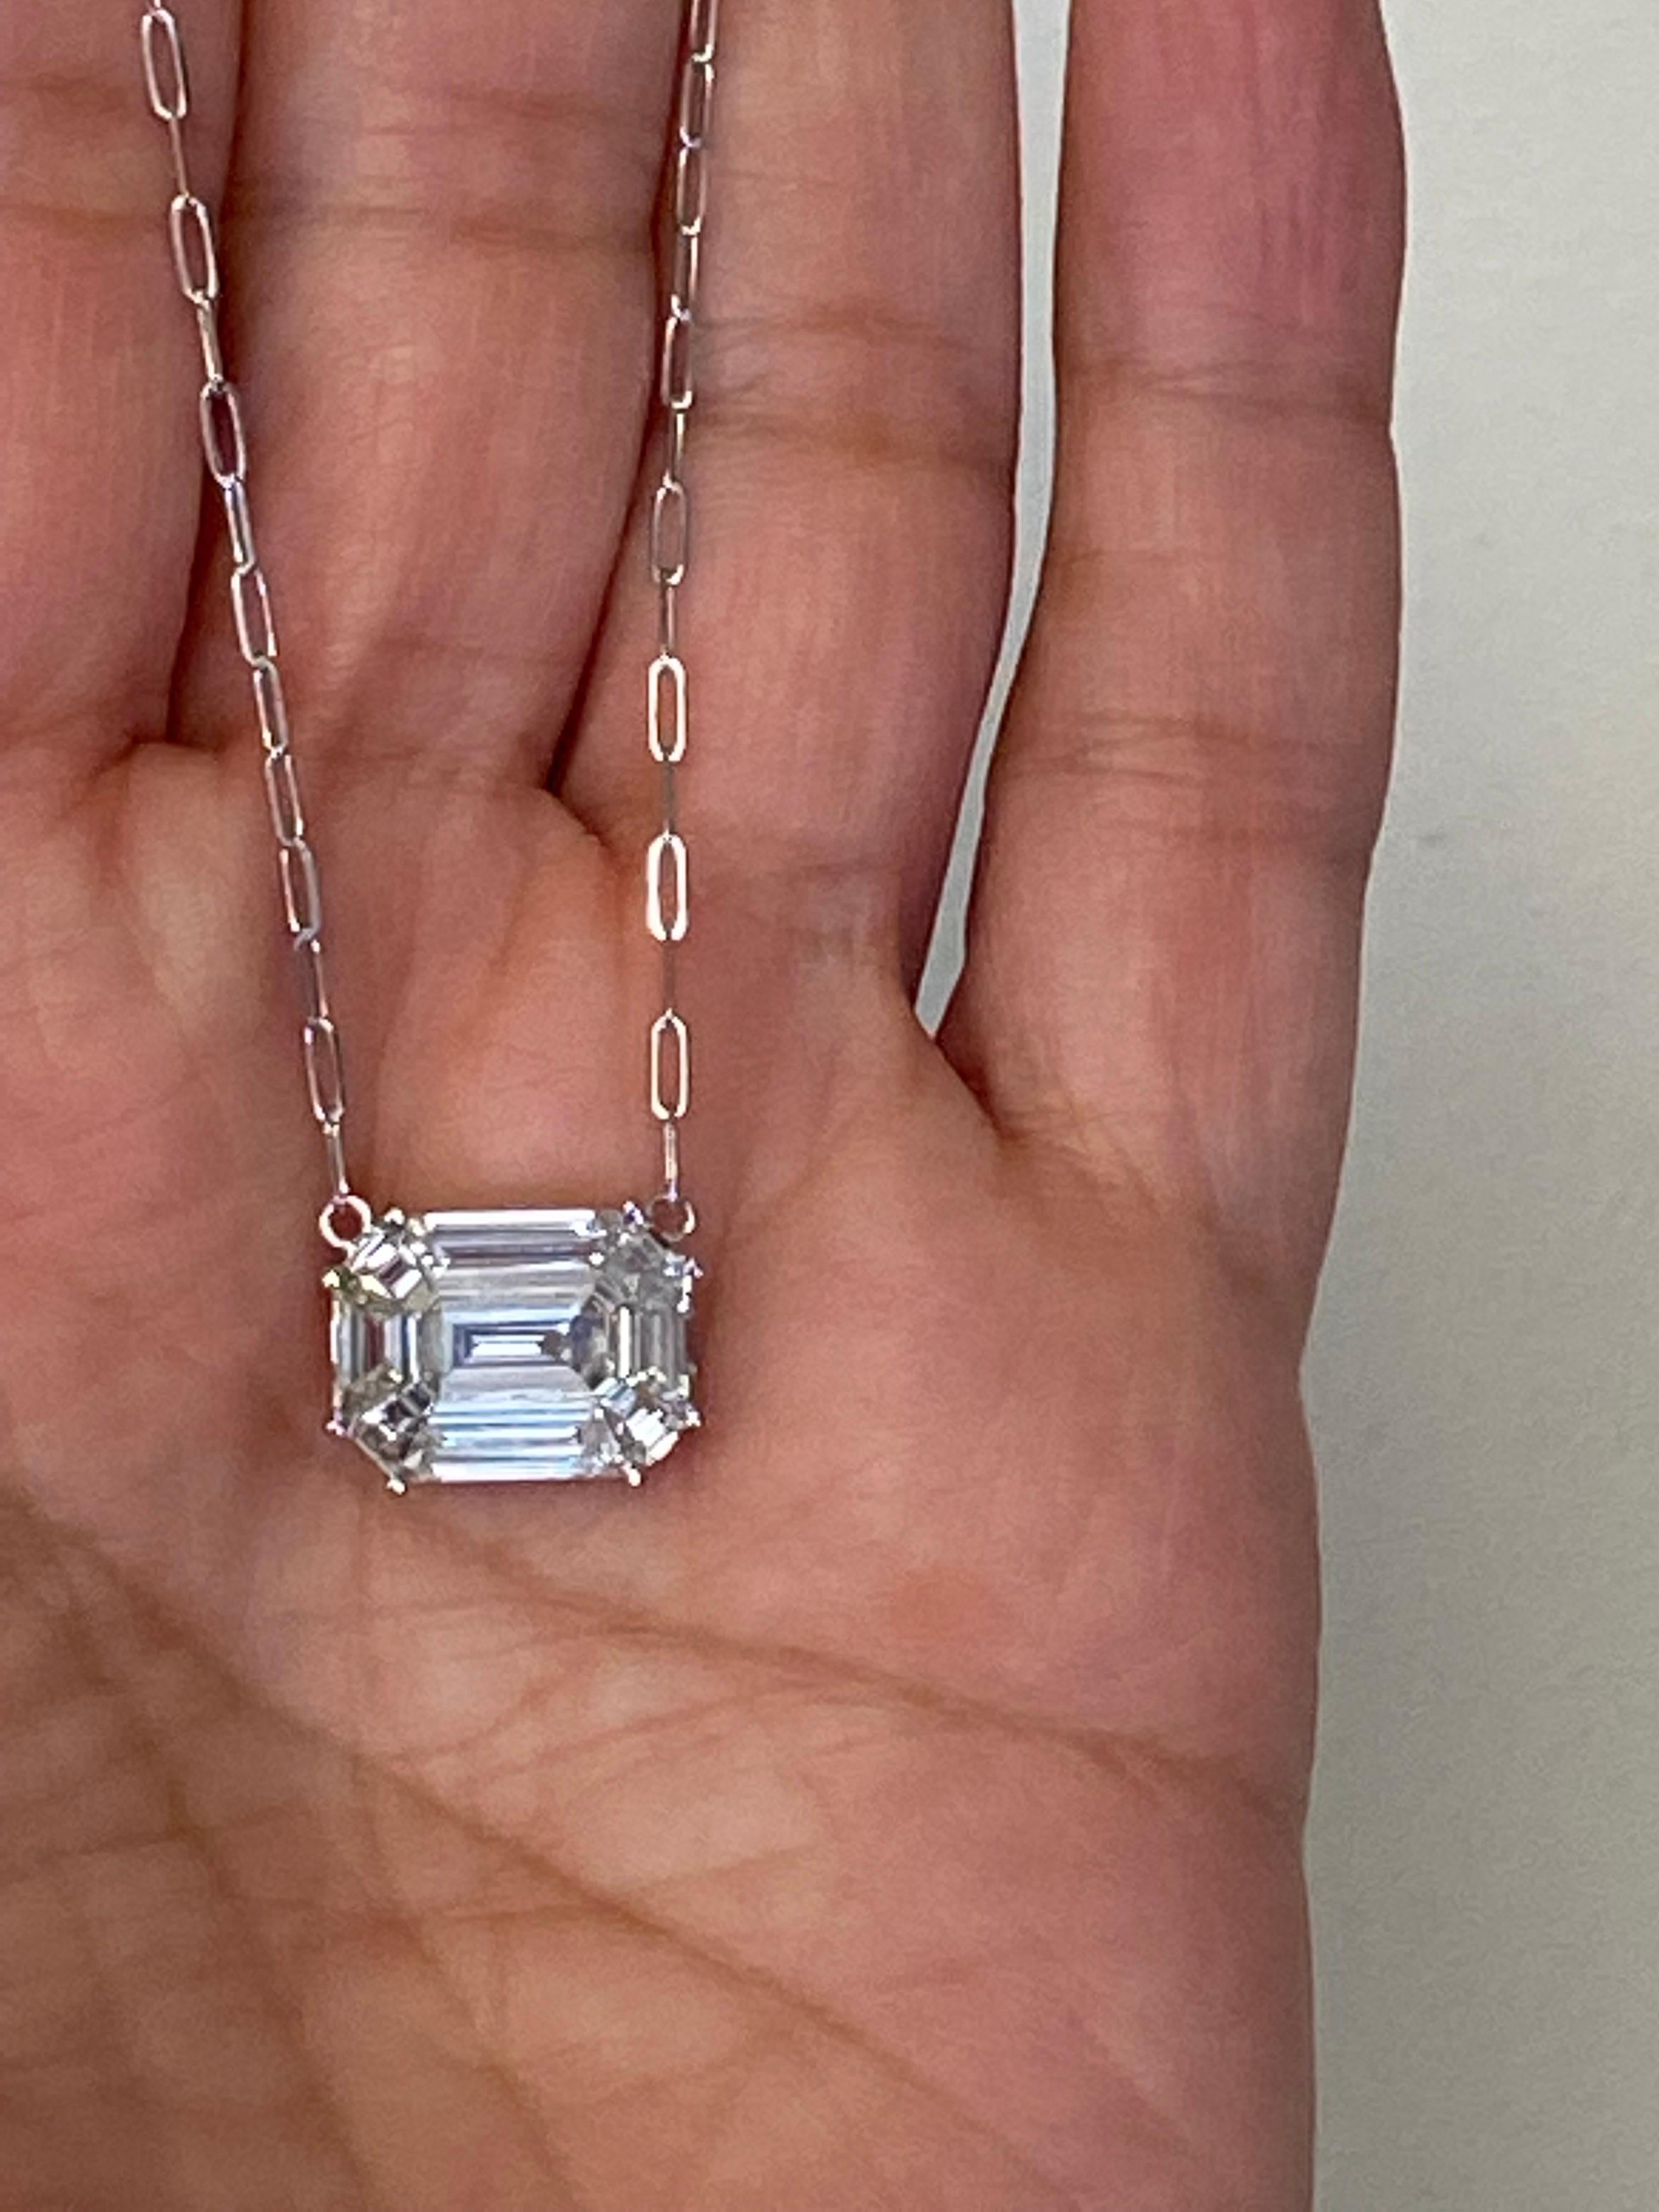 Cluster of baguette, emerald, and trapezoid diamonds set in 18K white gold to create the illusion of a 12 carat emerald cut look. The color of the stones are F, the clarity is VVS1. The total carat weight of the piece is 3.06. This pendant is